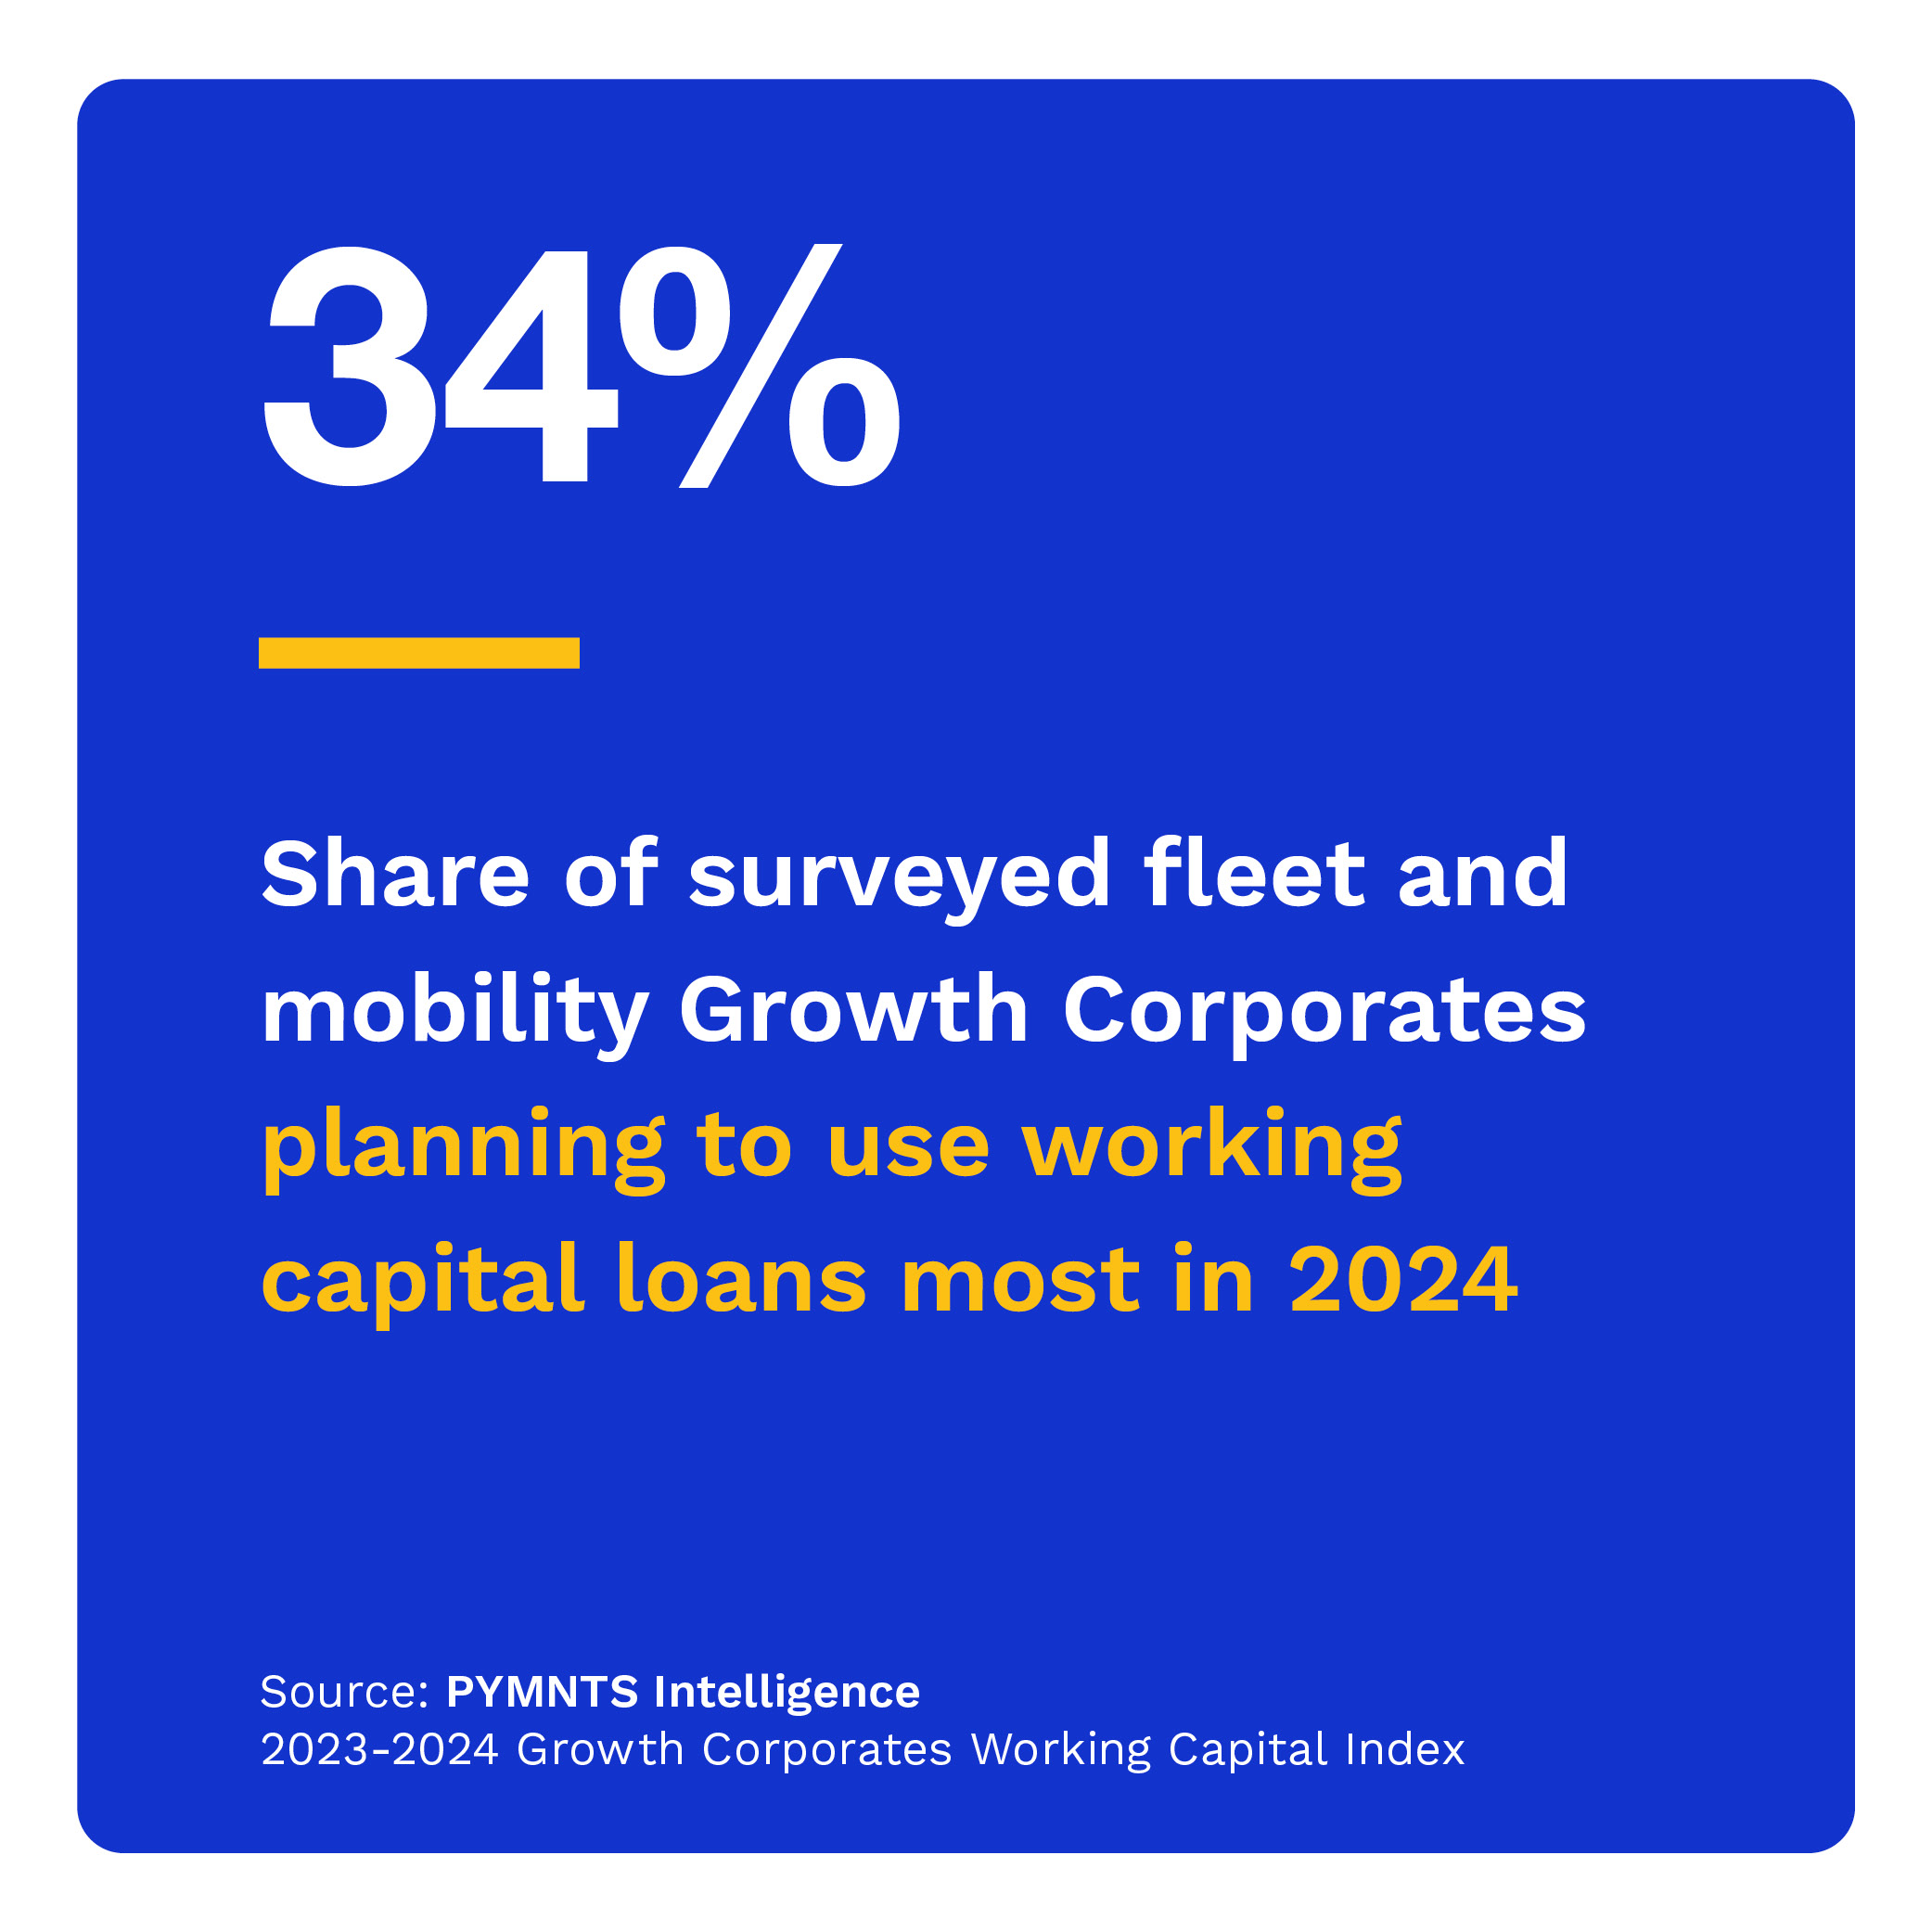 34%: Share of fleet and mobility Growth Corporates planning to use working capital loans most in 2024